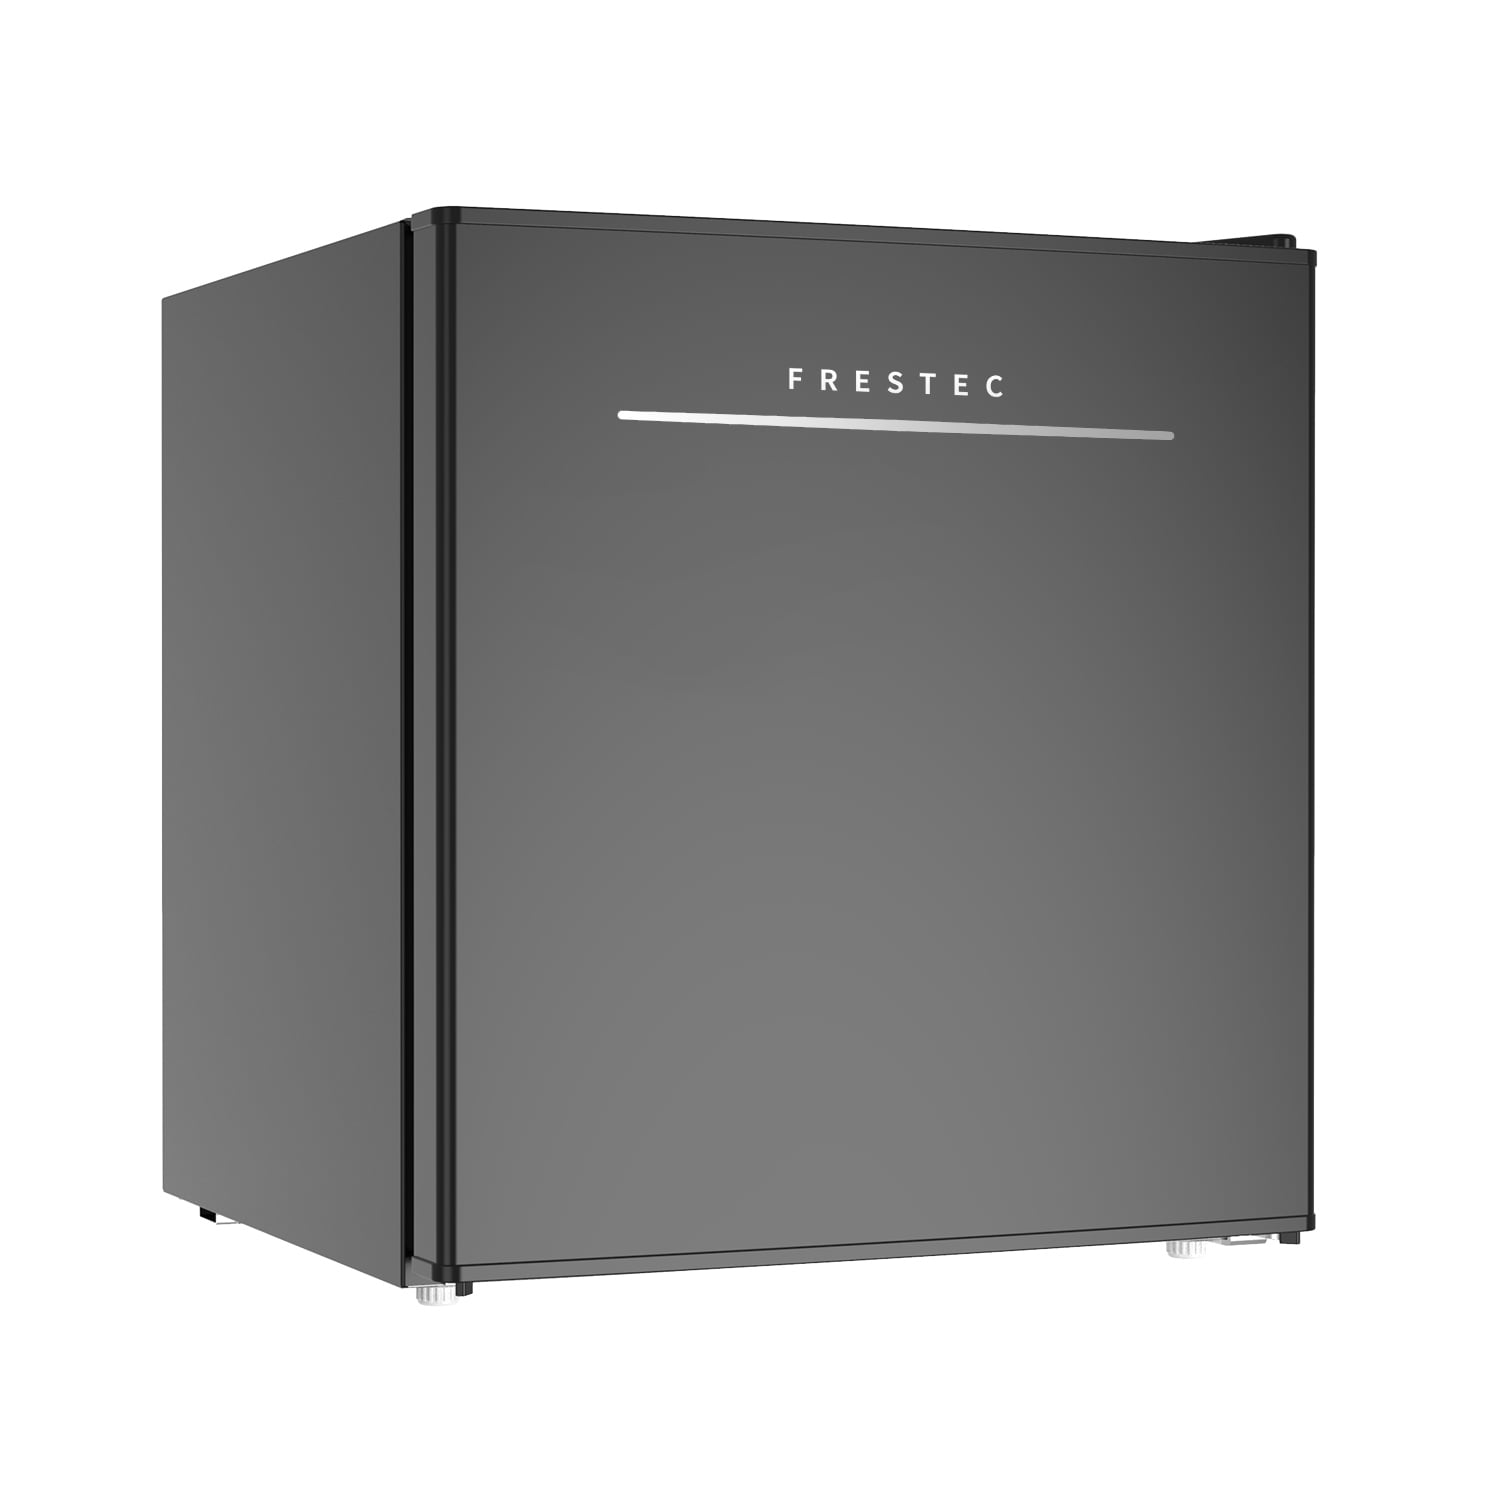 E-Macht 1.6 Cu.Ft. Mini Fridge with Freezer, Single Door Compact  Refrigerator/Freezer with Removable Shelf, Small Refrigerator for  Apartment, Office